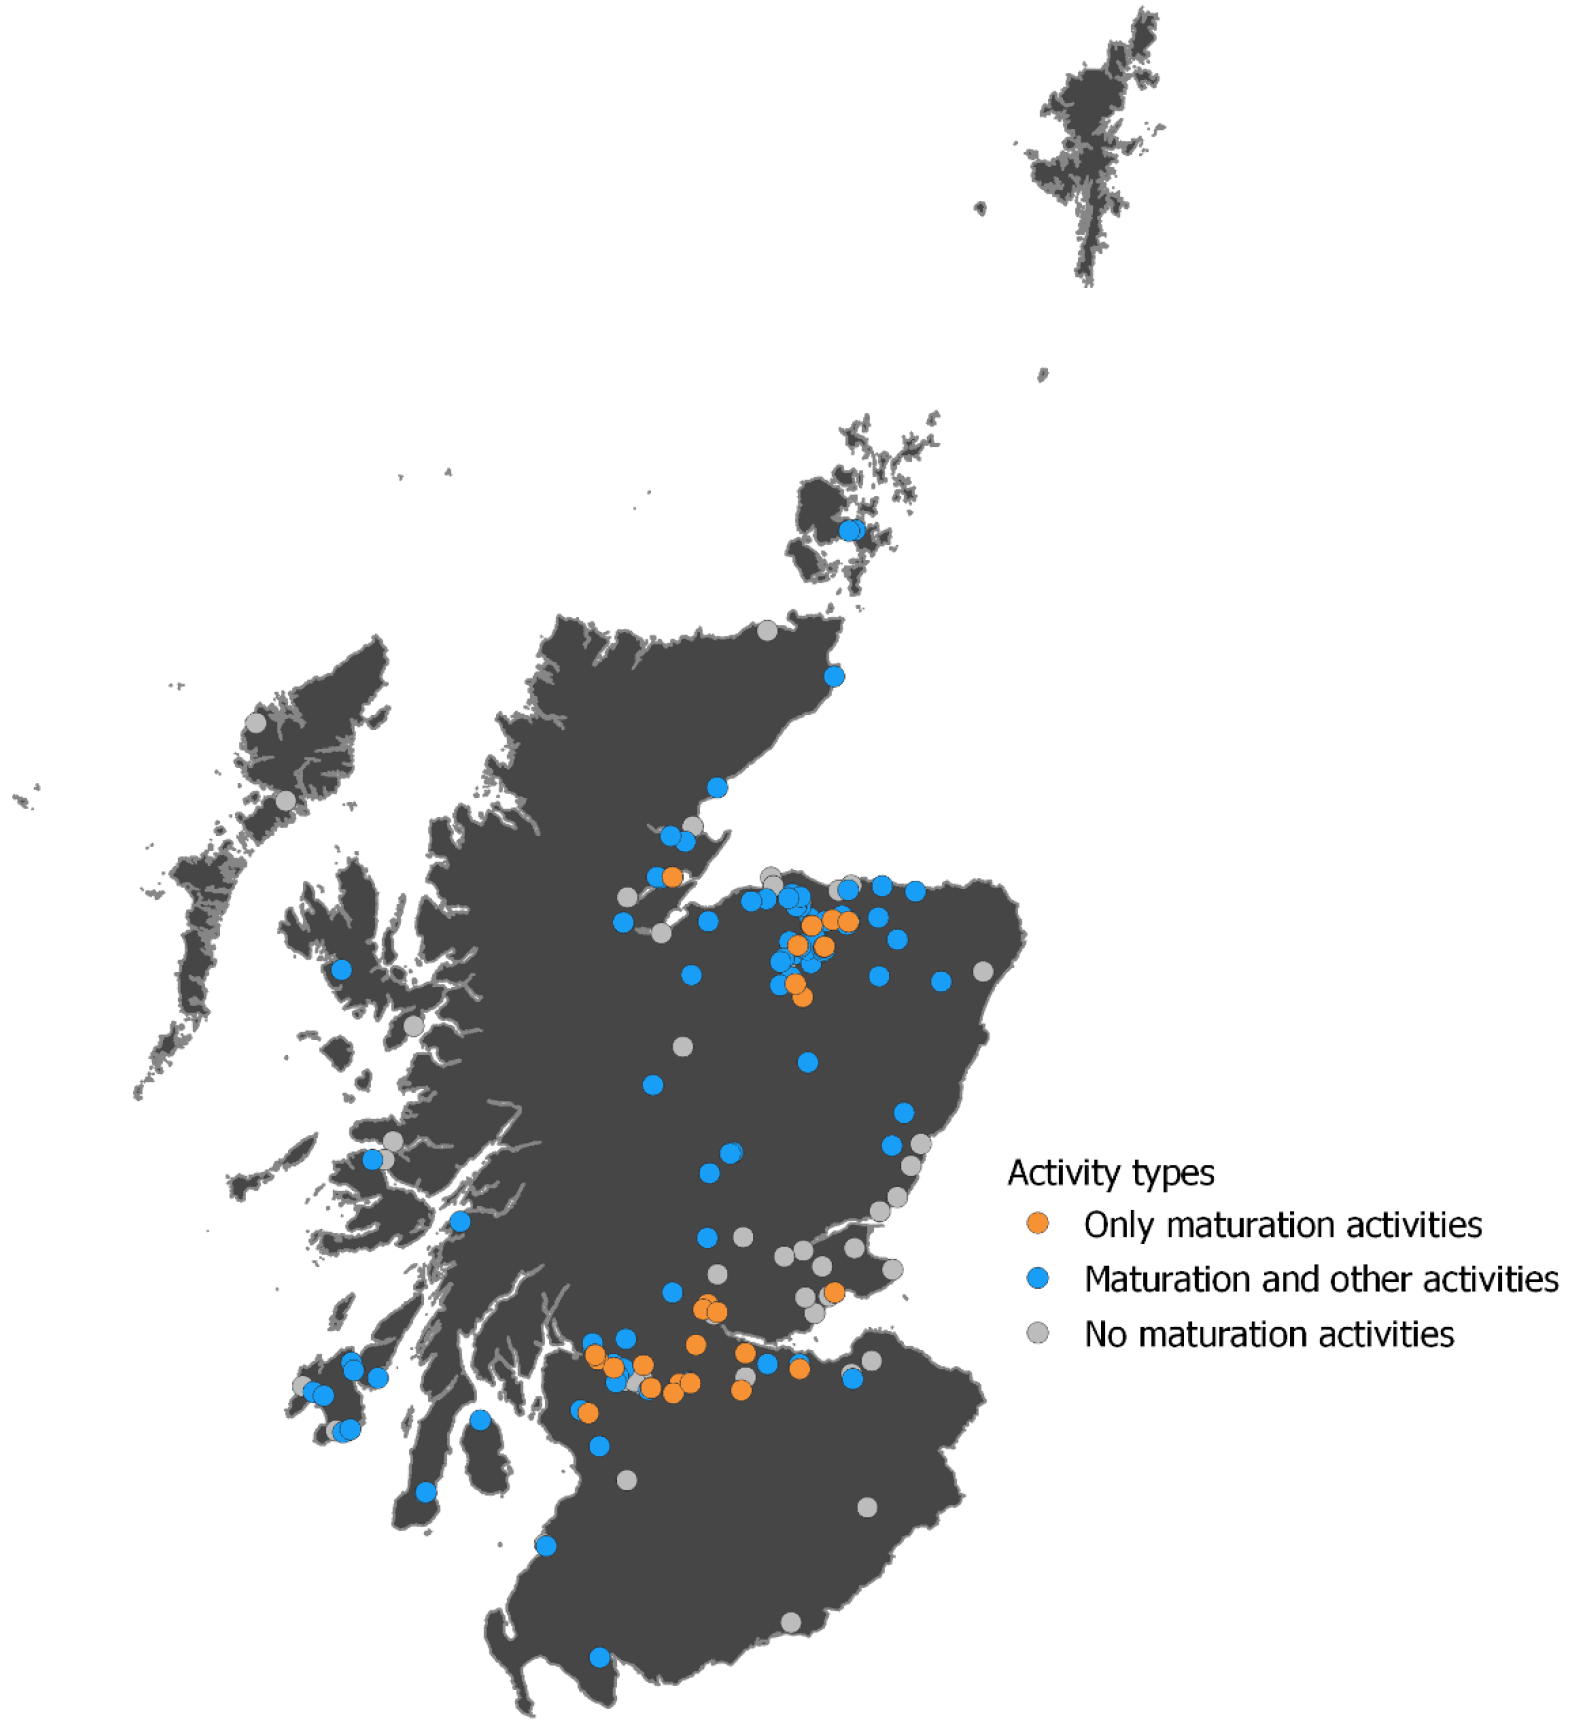 Locations of Scotch whisky facilities in Scotland and the activities undertaken at them.